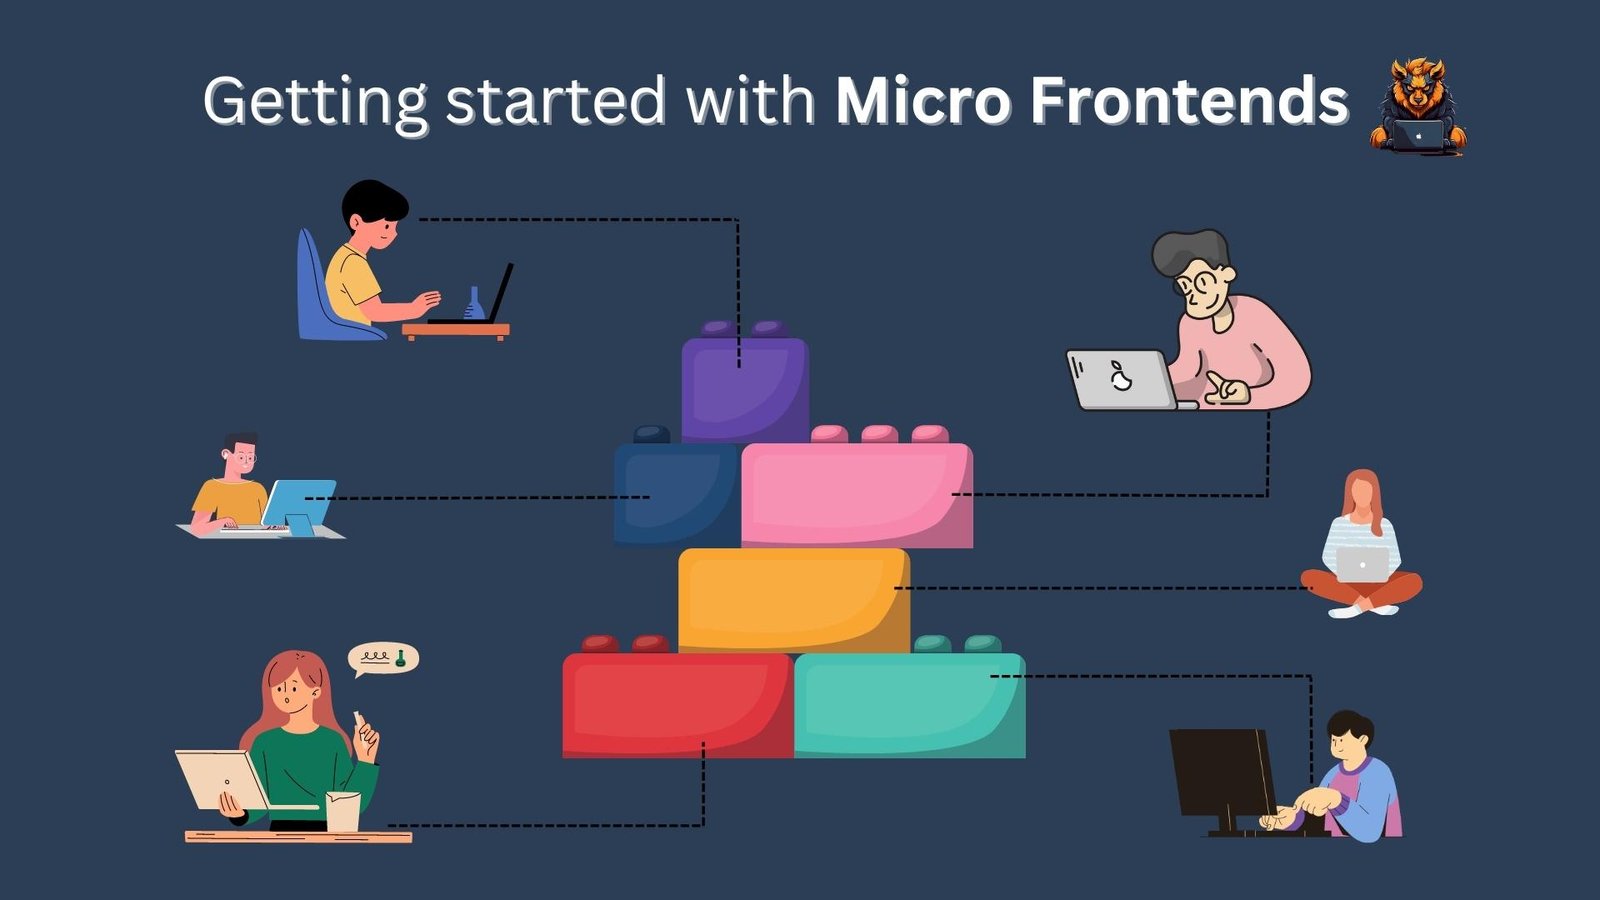 Getting Started with Micro Frontends